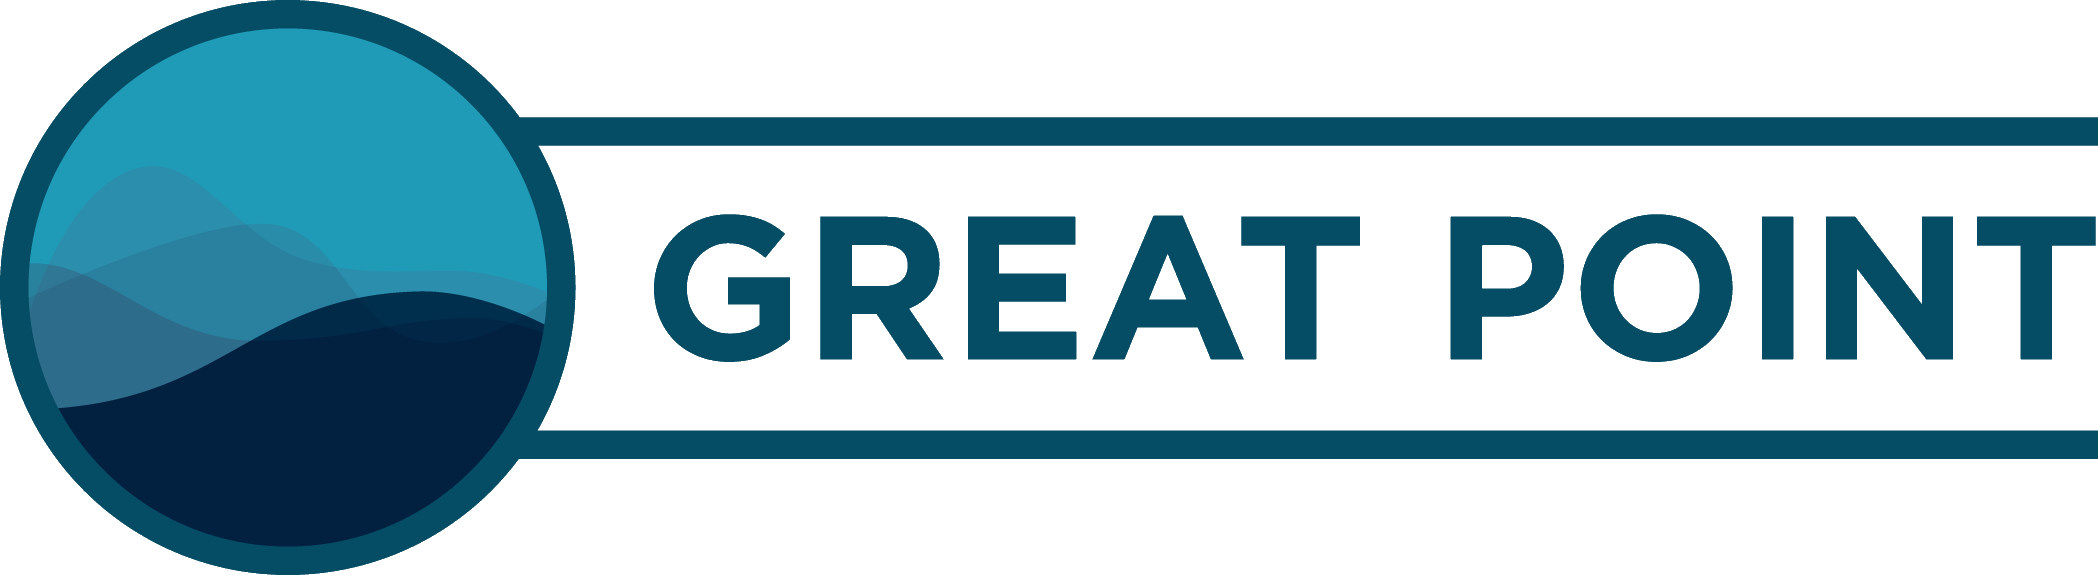 Great Point Logo